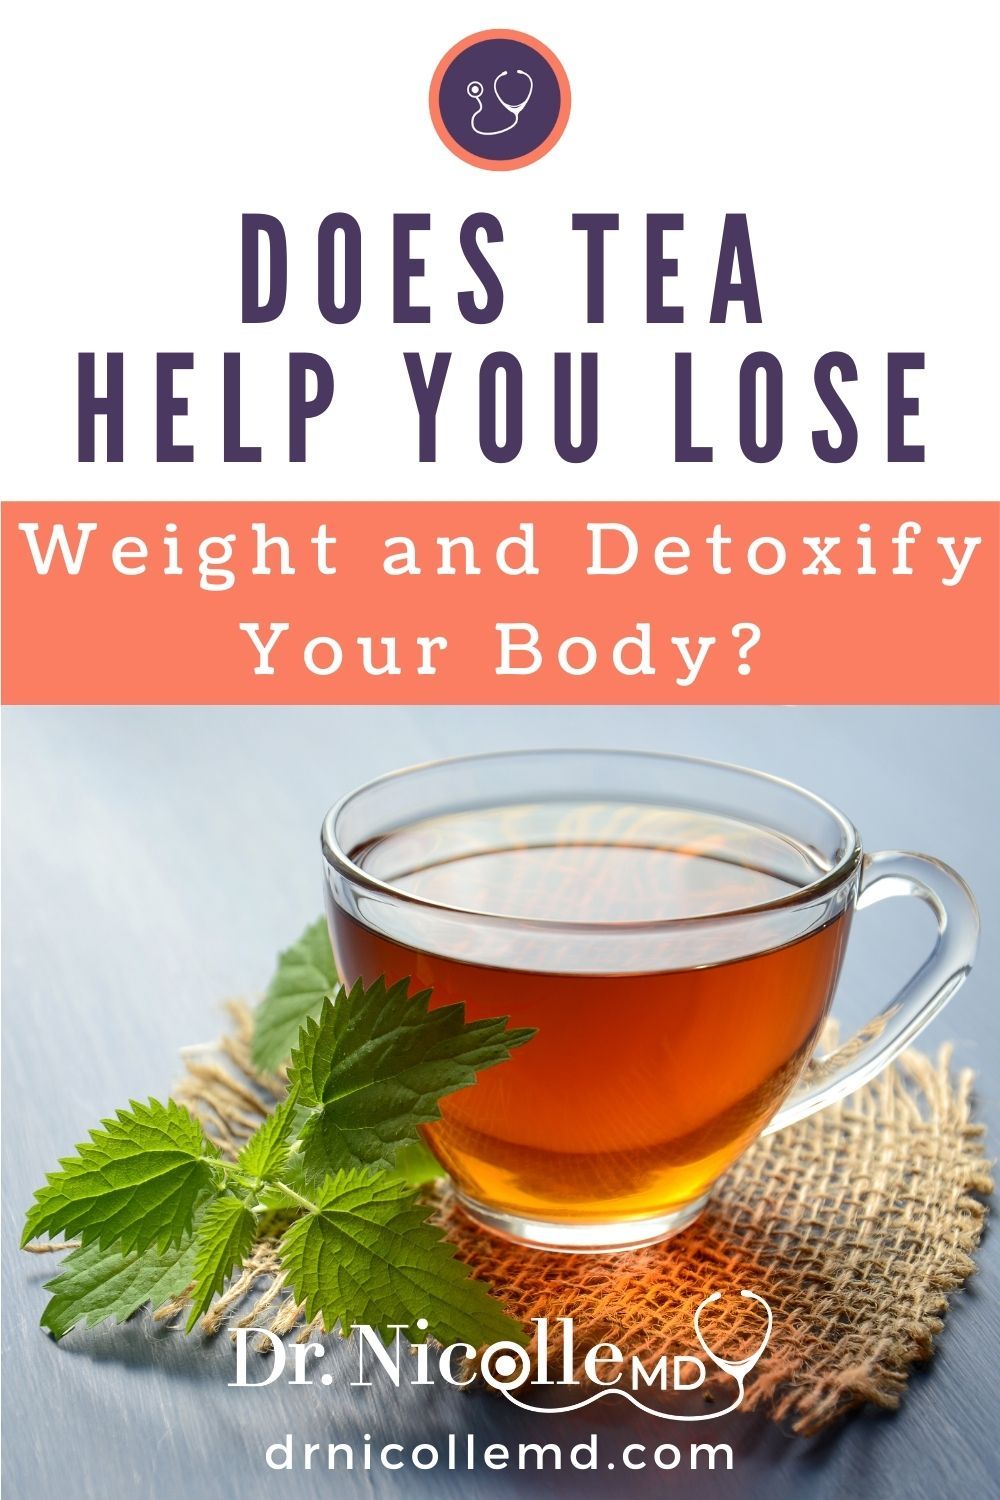 Does Tea Help You Lose Weight and Detoxify Your Body?